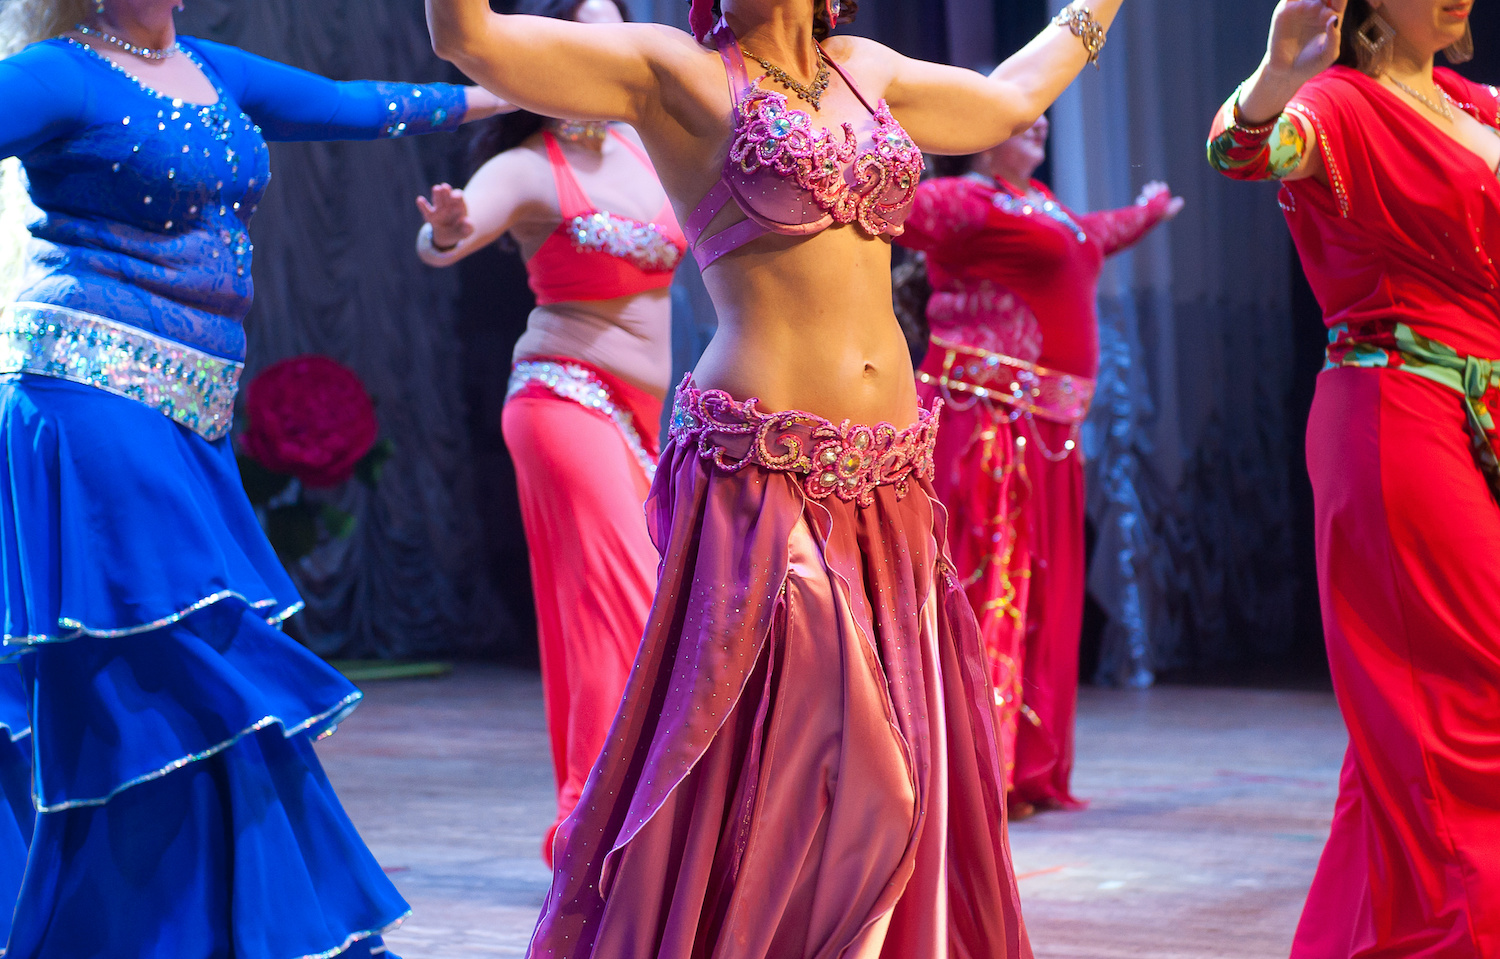 Lebanese belly dancing. The origins, traditions, popular performers